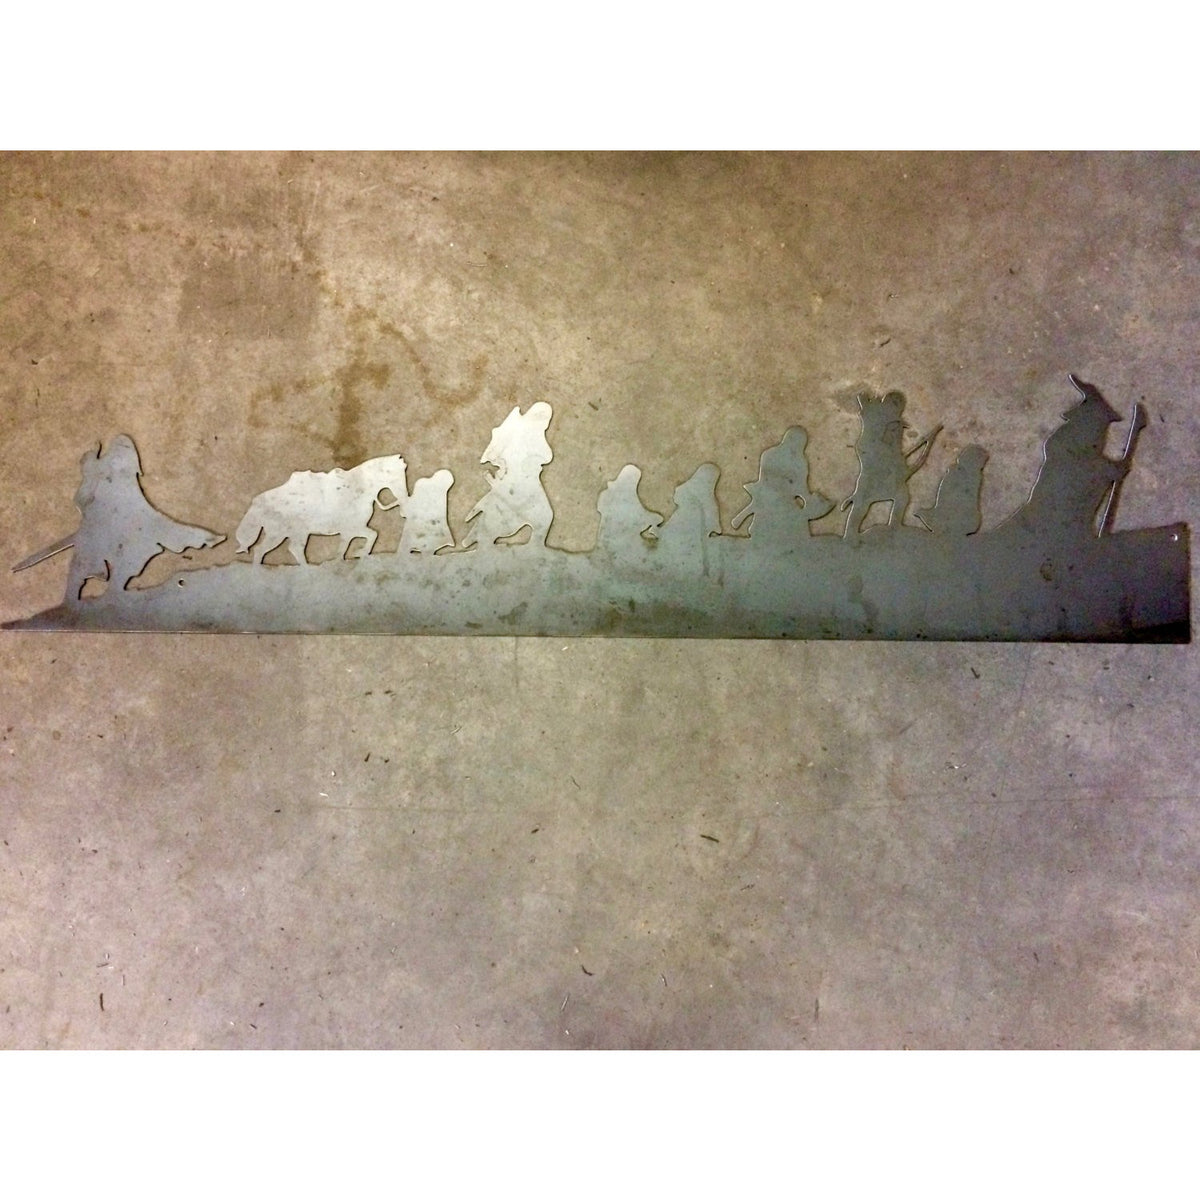 Lord of the Rings Fellowship Silhouette | Metal Wall Art | 40" | #LotR